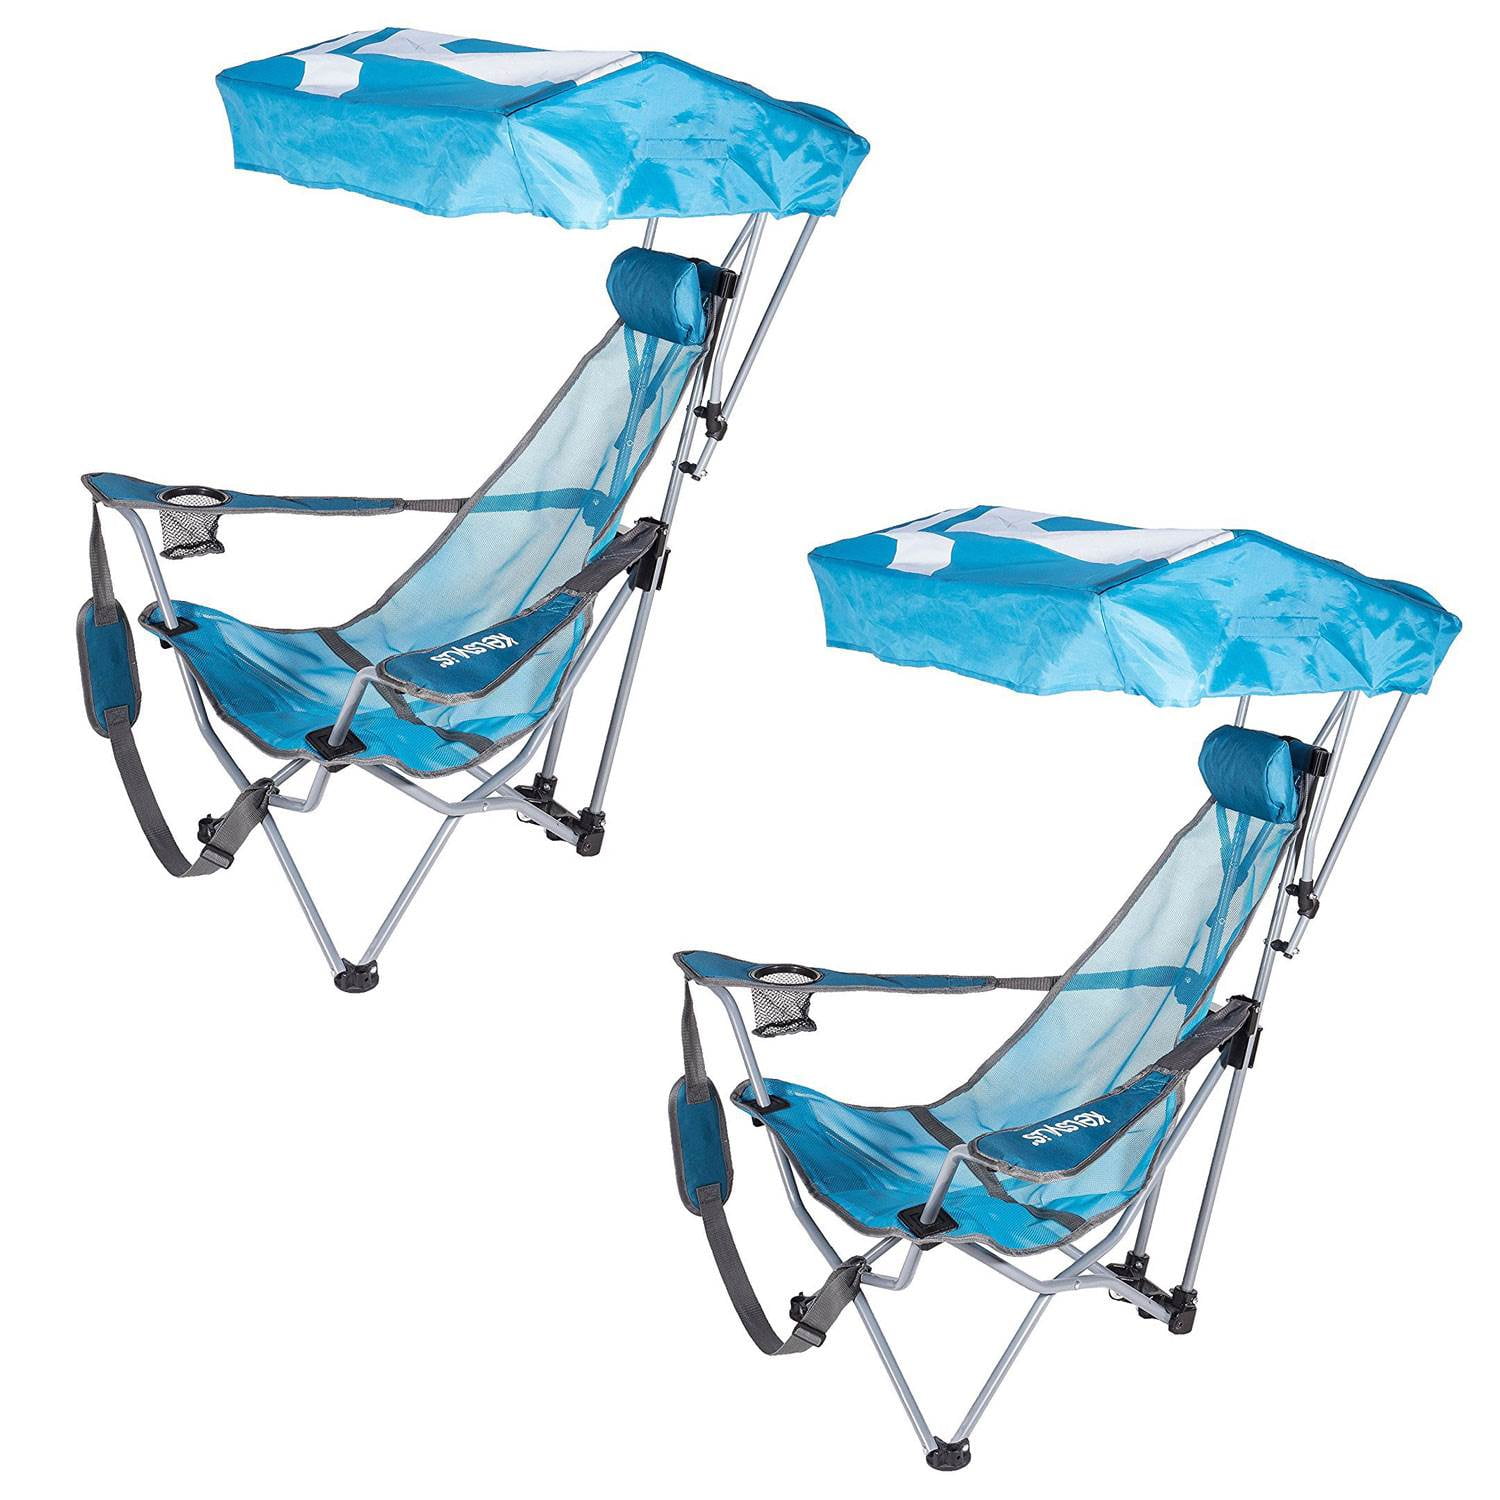 New Wirecutter Beach Chair for Small Space